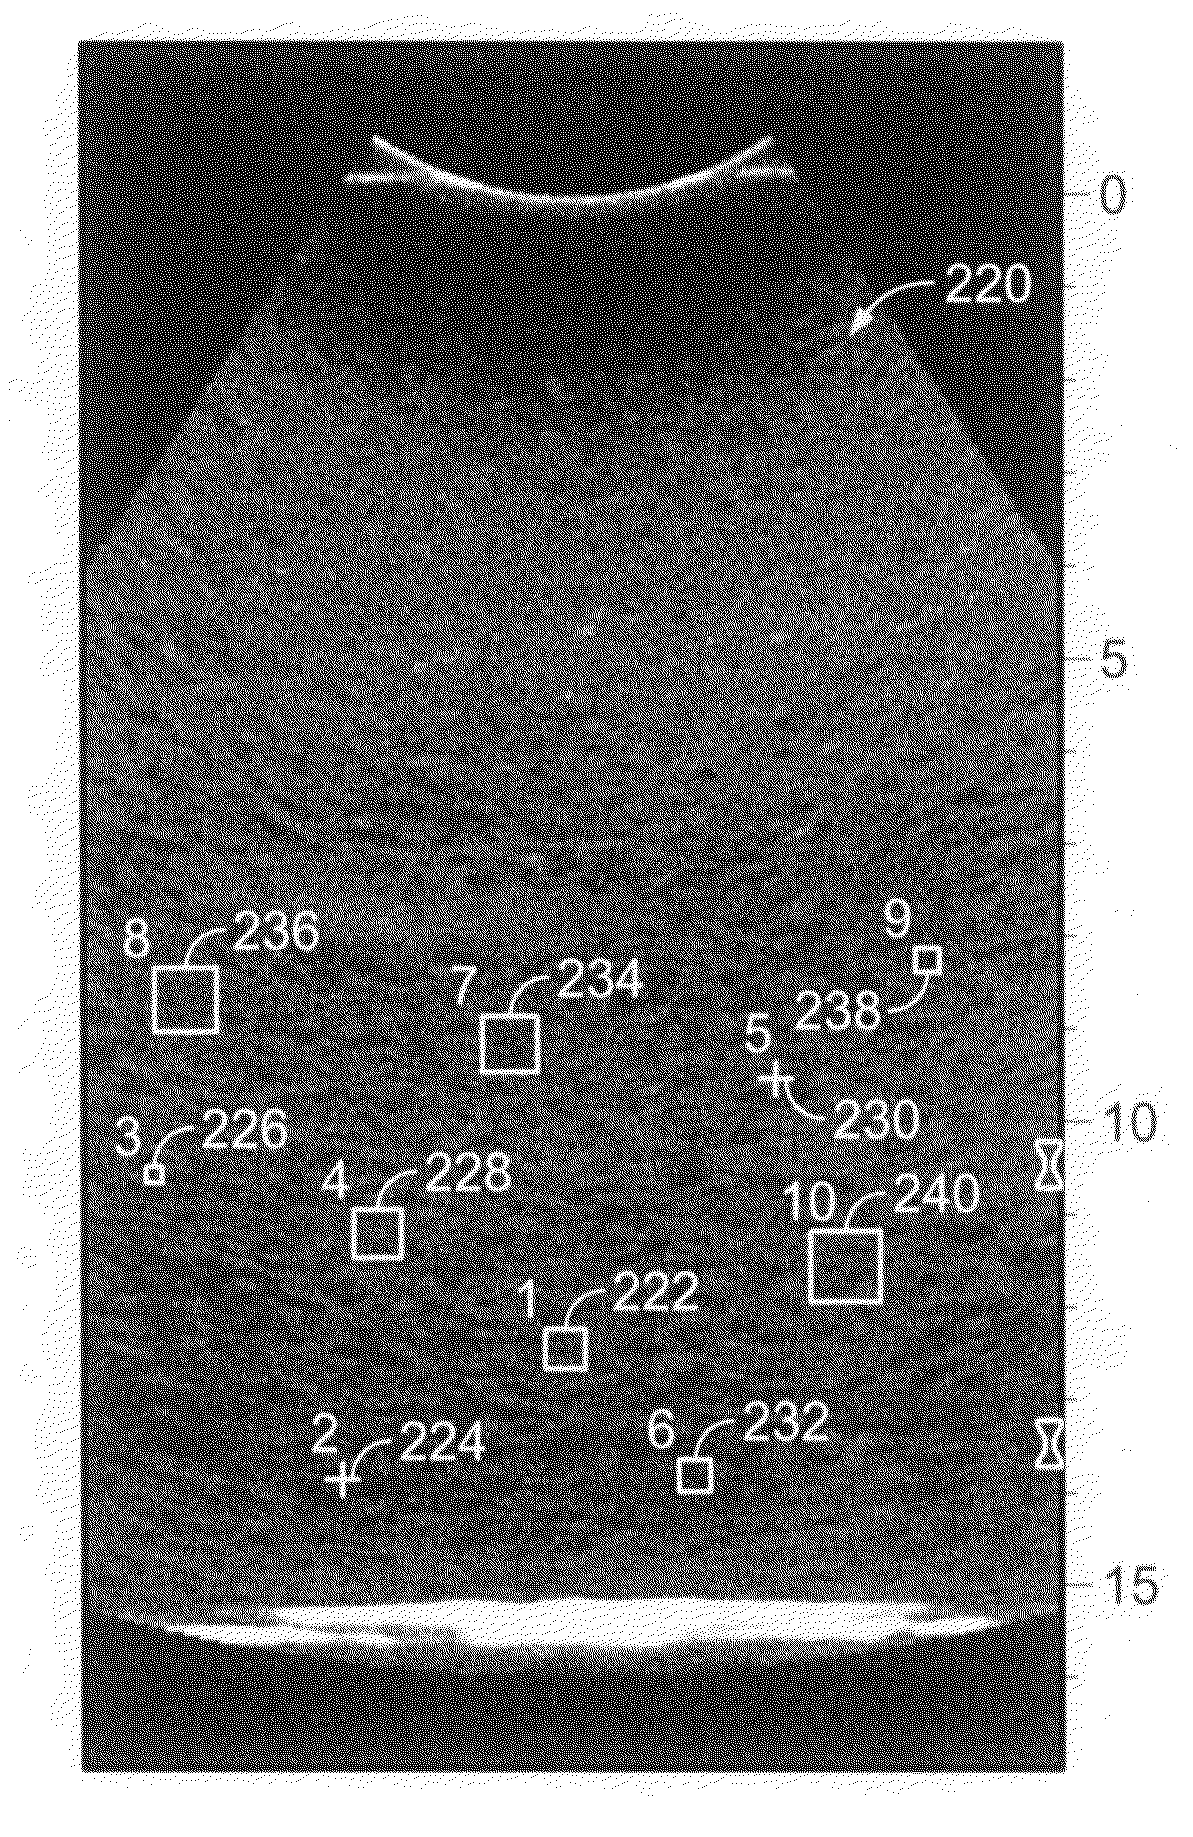 Method and apparatus for tracking points in an ultrasound image